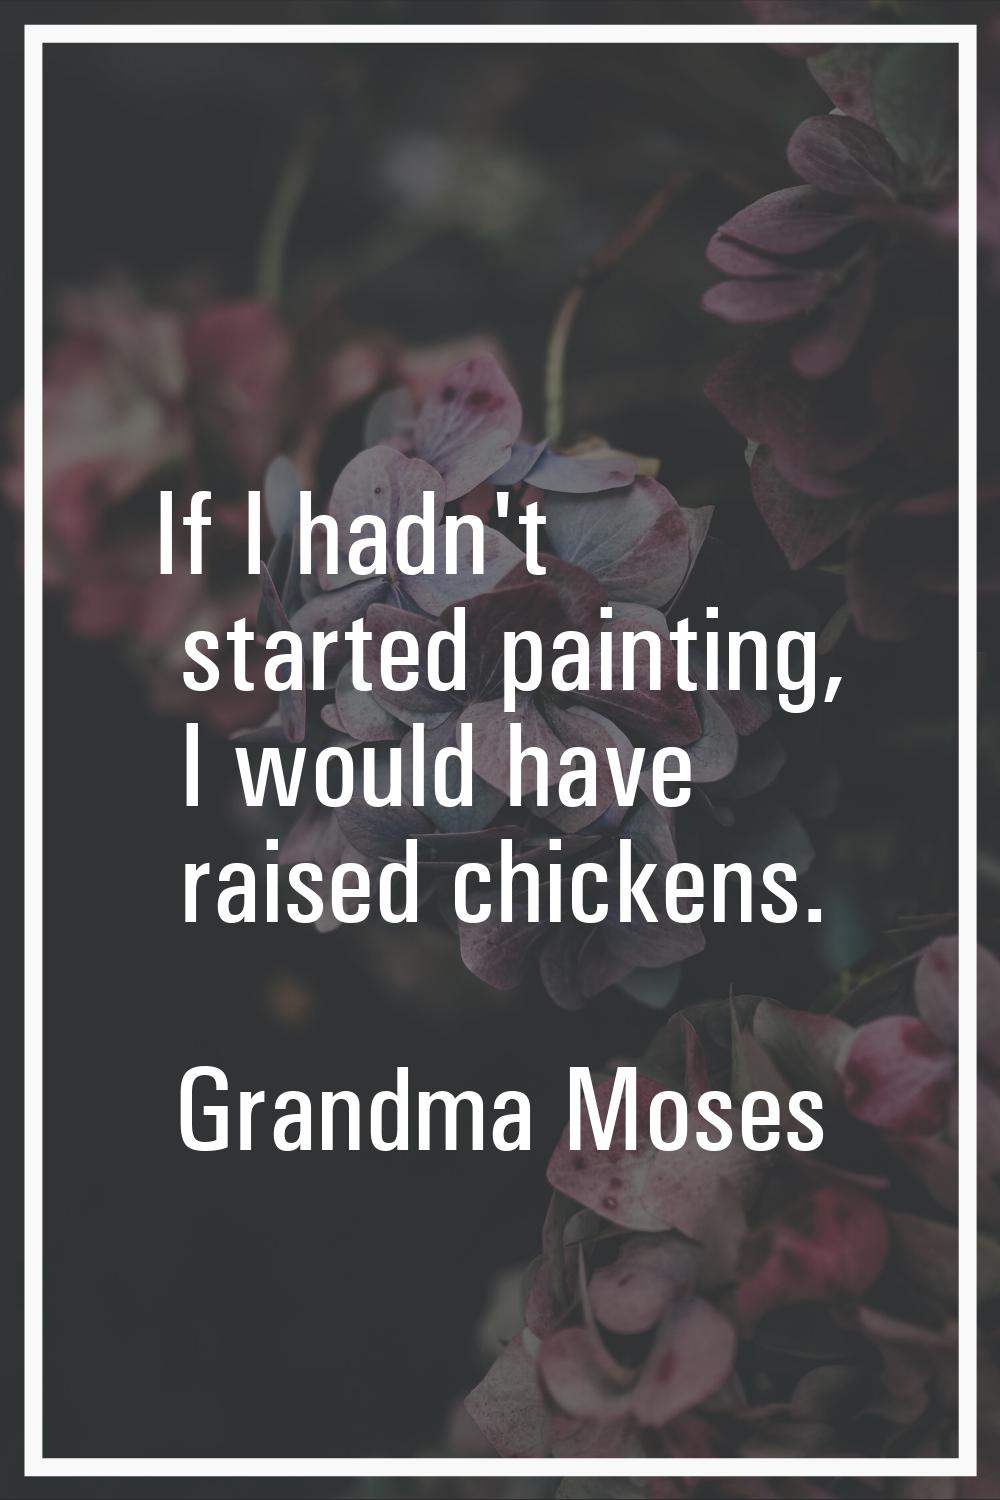 If I hadn't started painting, I would have raised chickens.